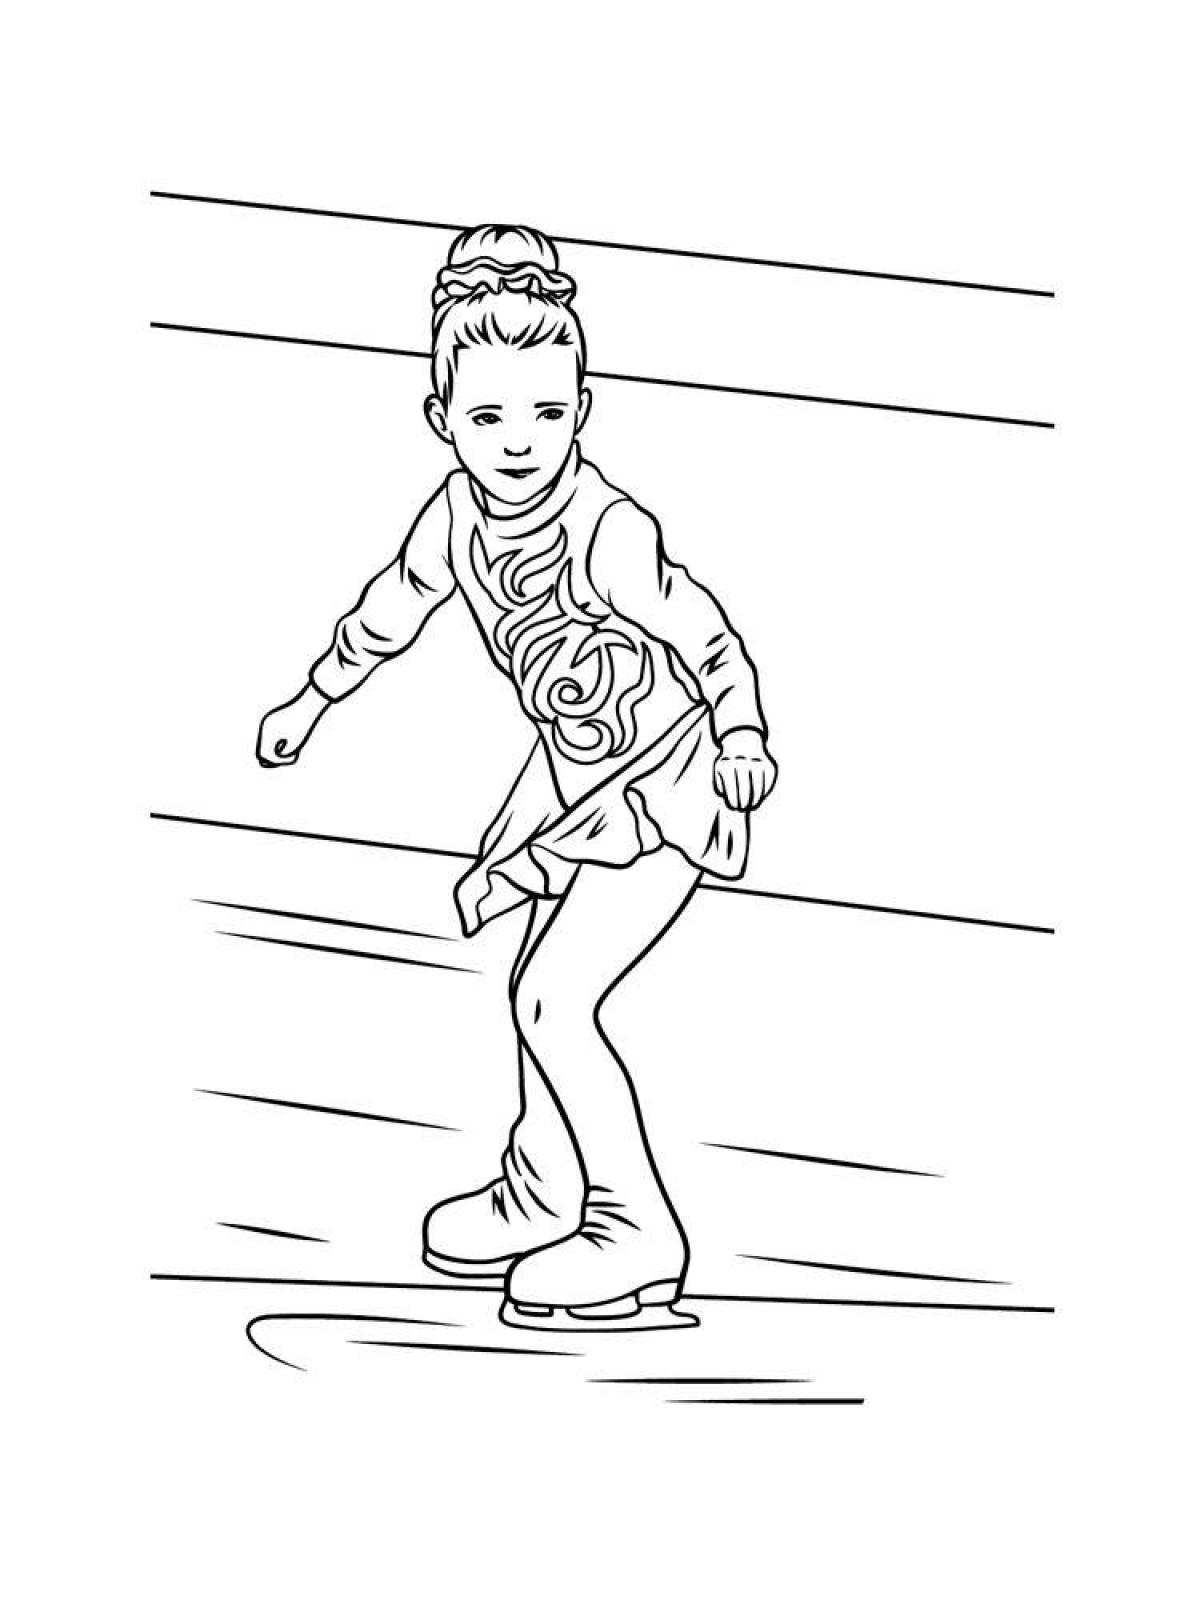 Outstanding winter sports coloring page for 6-7 year olds